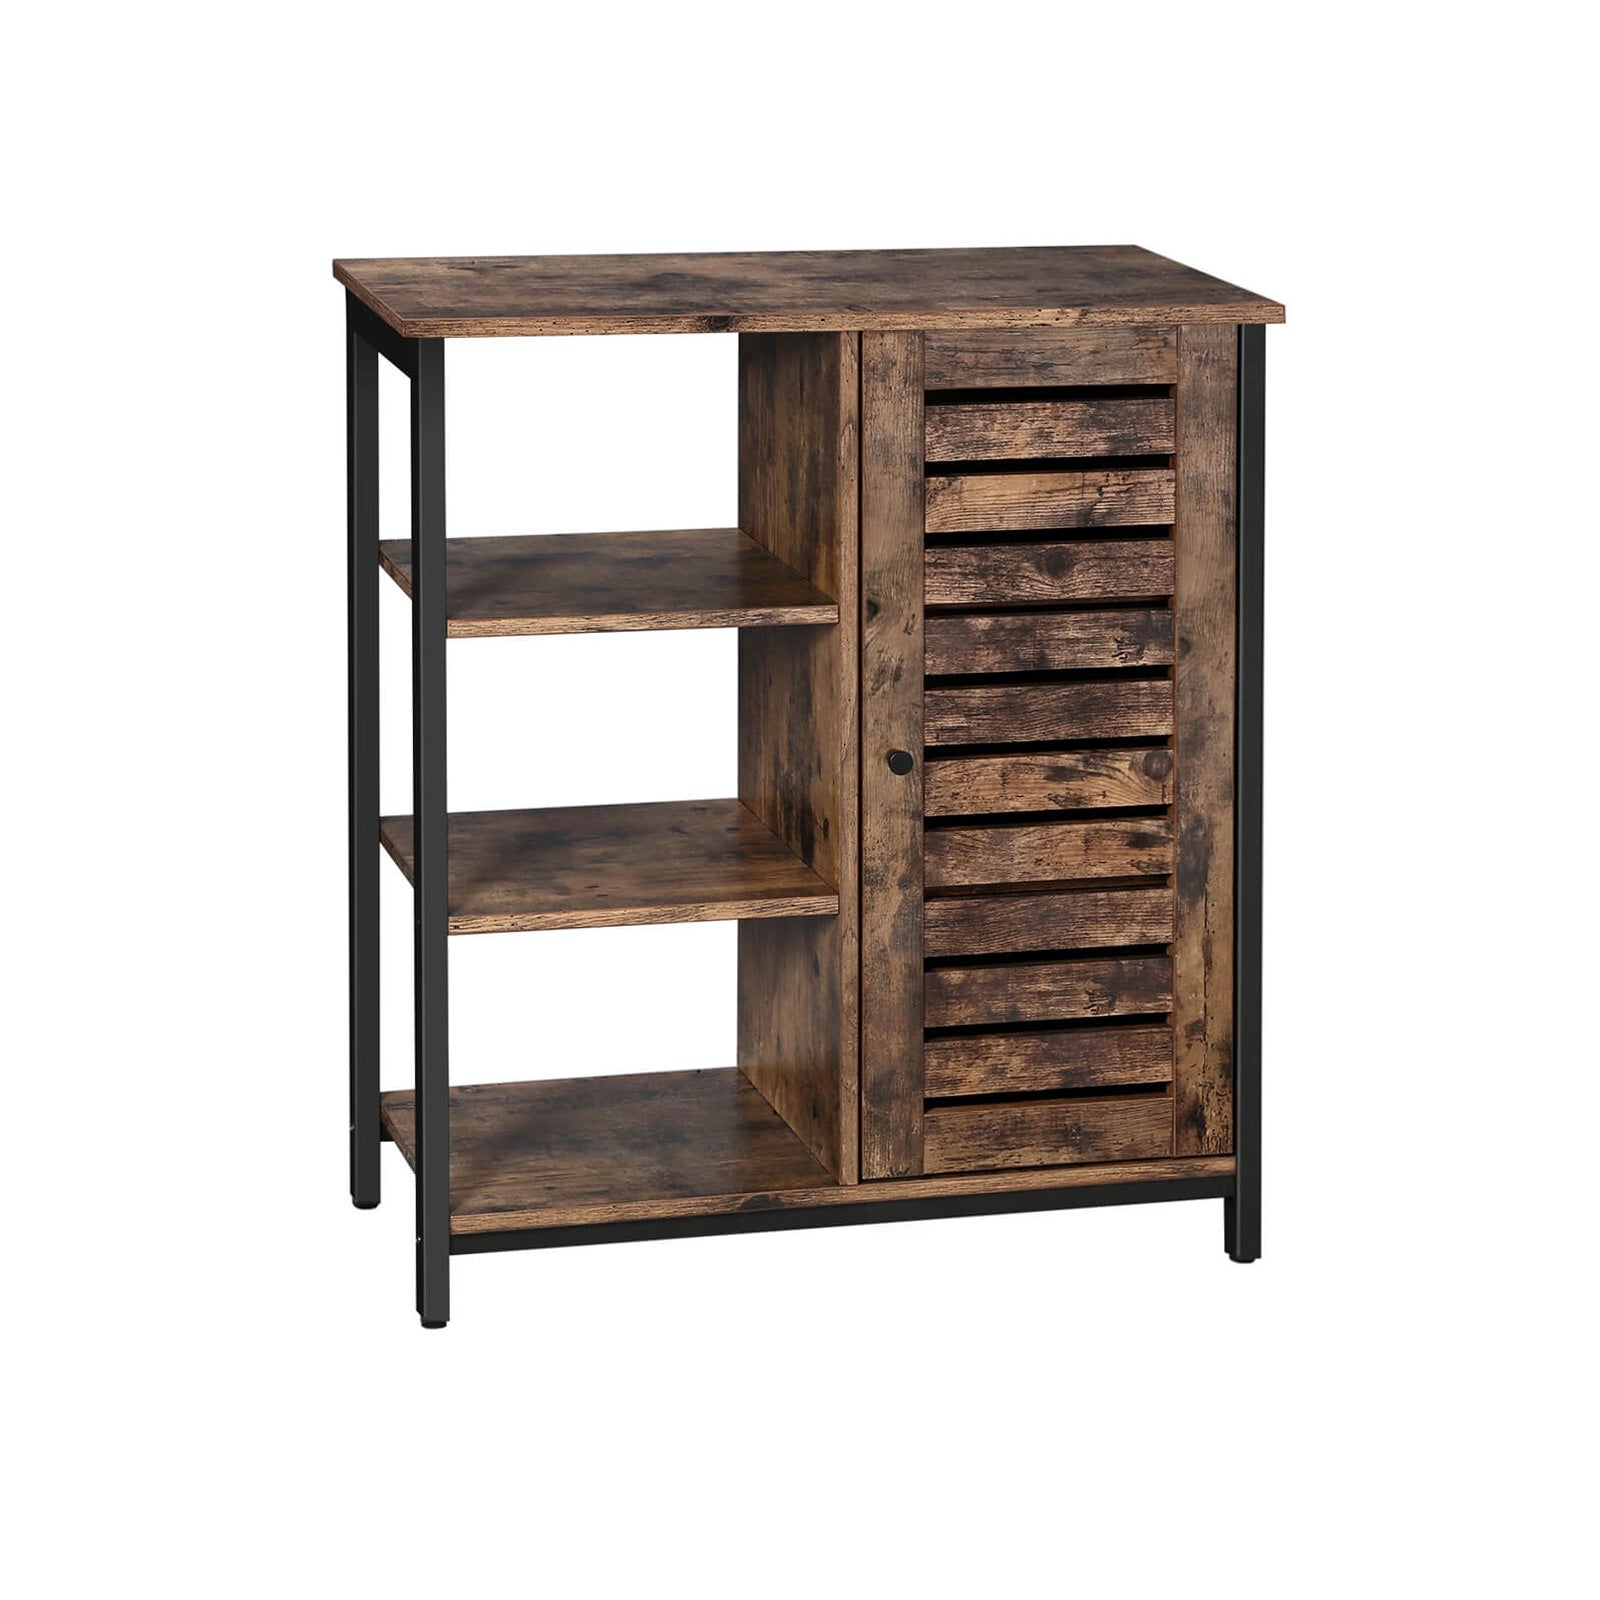 VASAGLE Industrial Rustic Brown Storage Cabinet With 3 Shelves